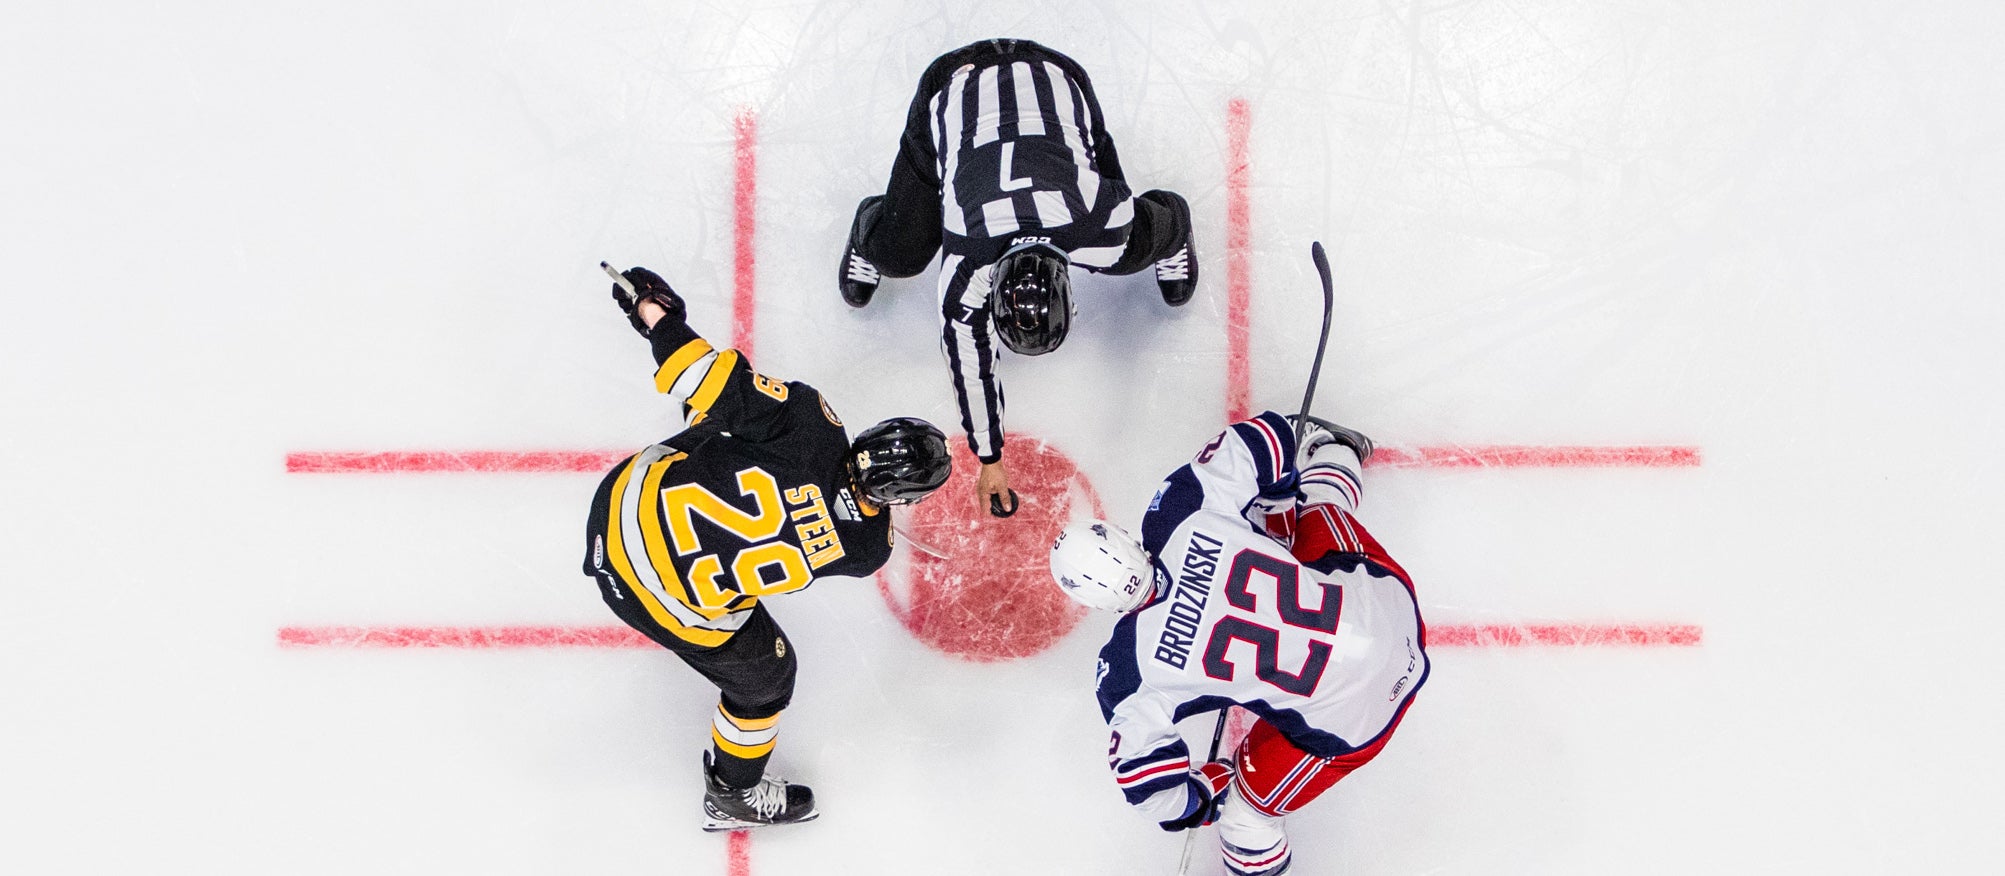 P-BRUINS EARN ONE POINT IN FIRST ROAD GAME, FALL TO HARTFORD WOLF PACK IN SHOOTOUT, 4-3